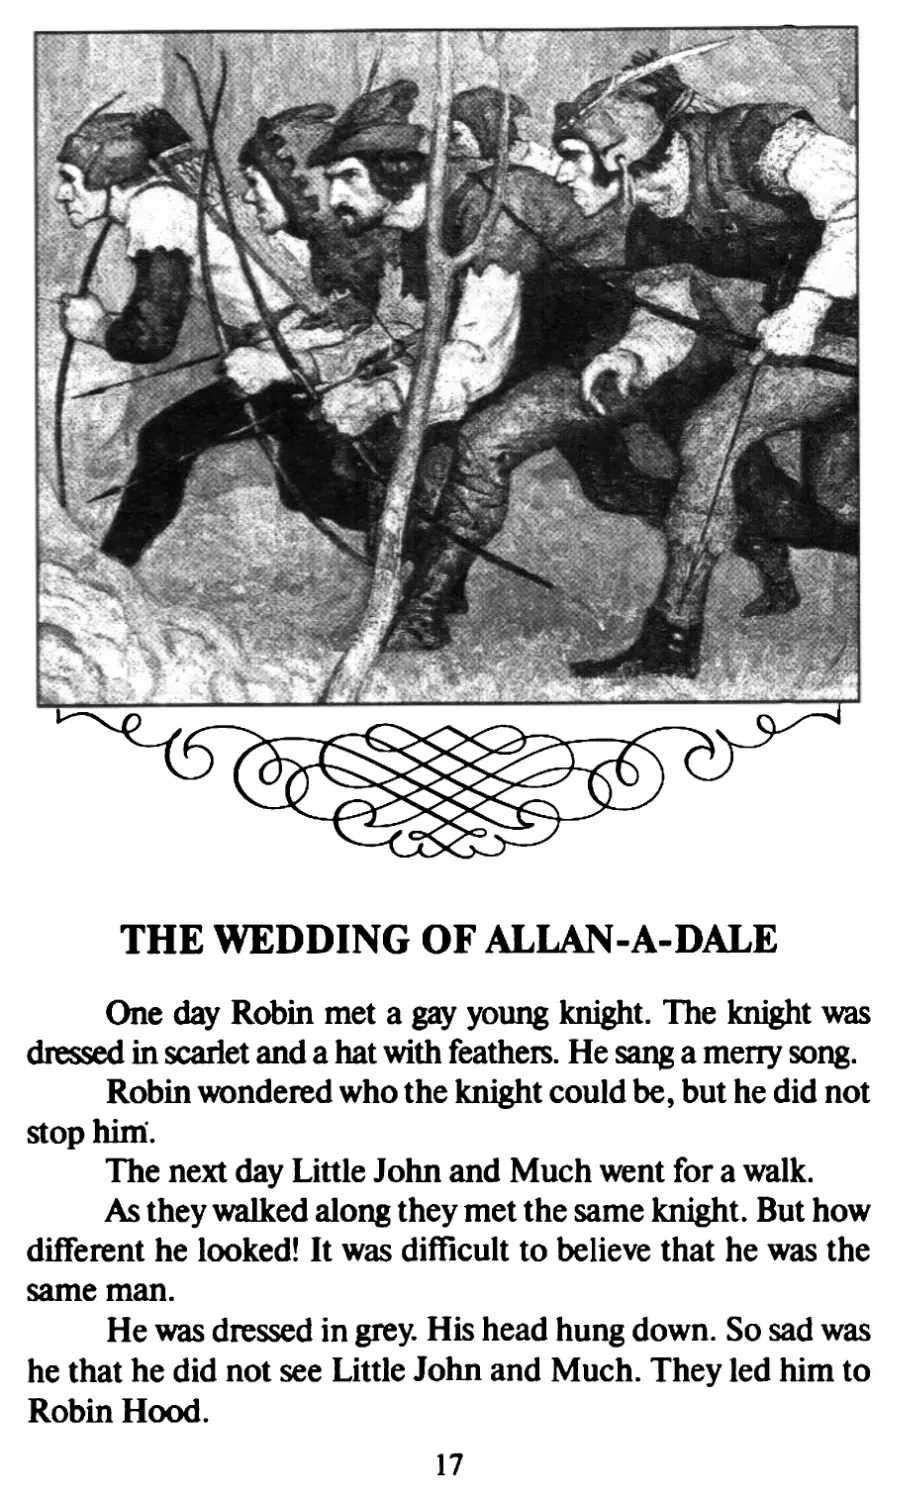 The Wedding of Allan-a-Dale